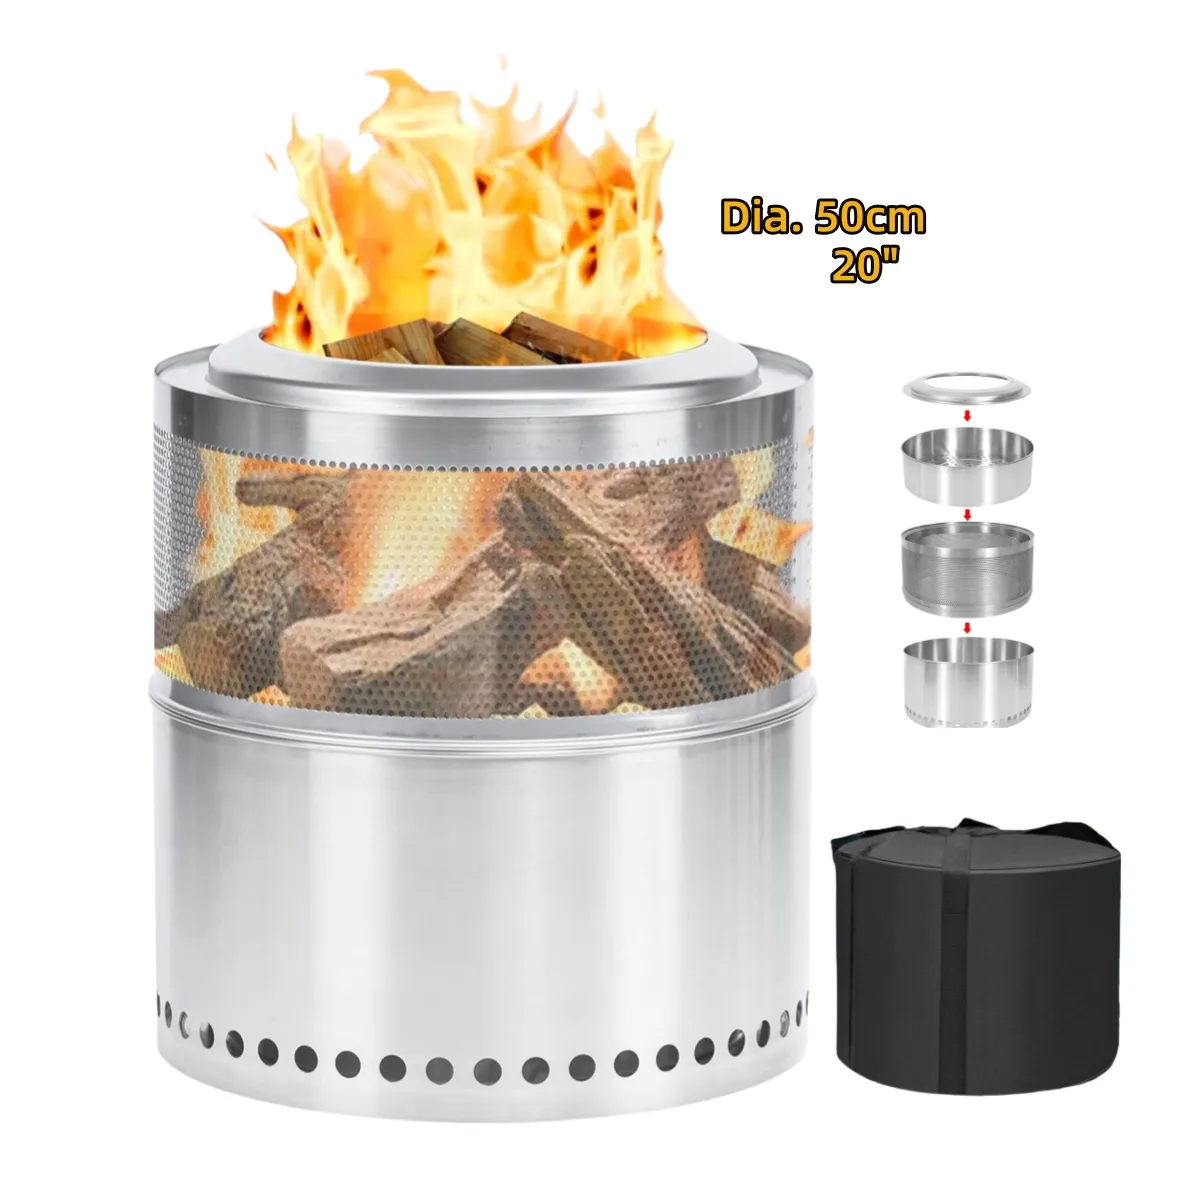 RTS Dia.19.5' Outdoor Camping BBQ Patio Stainless Steel Folding Fire Pit Smokeless BBQ Woood Stove Grill